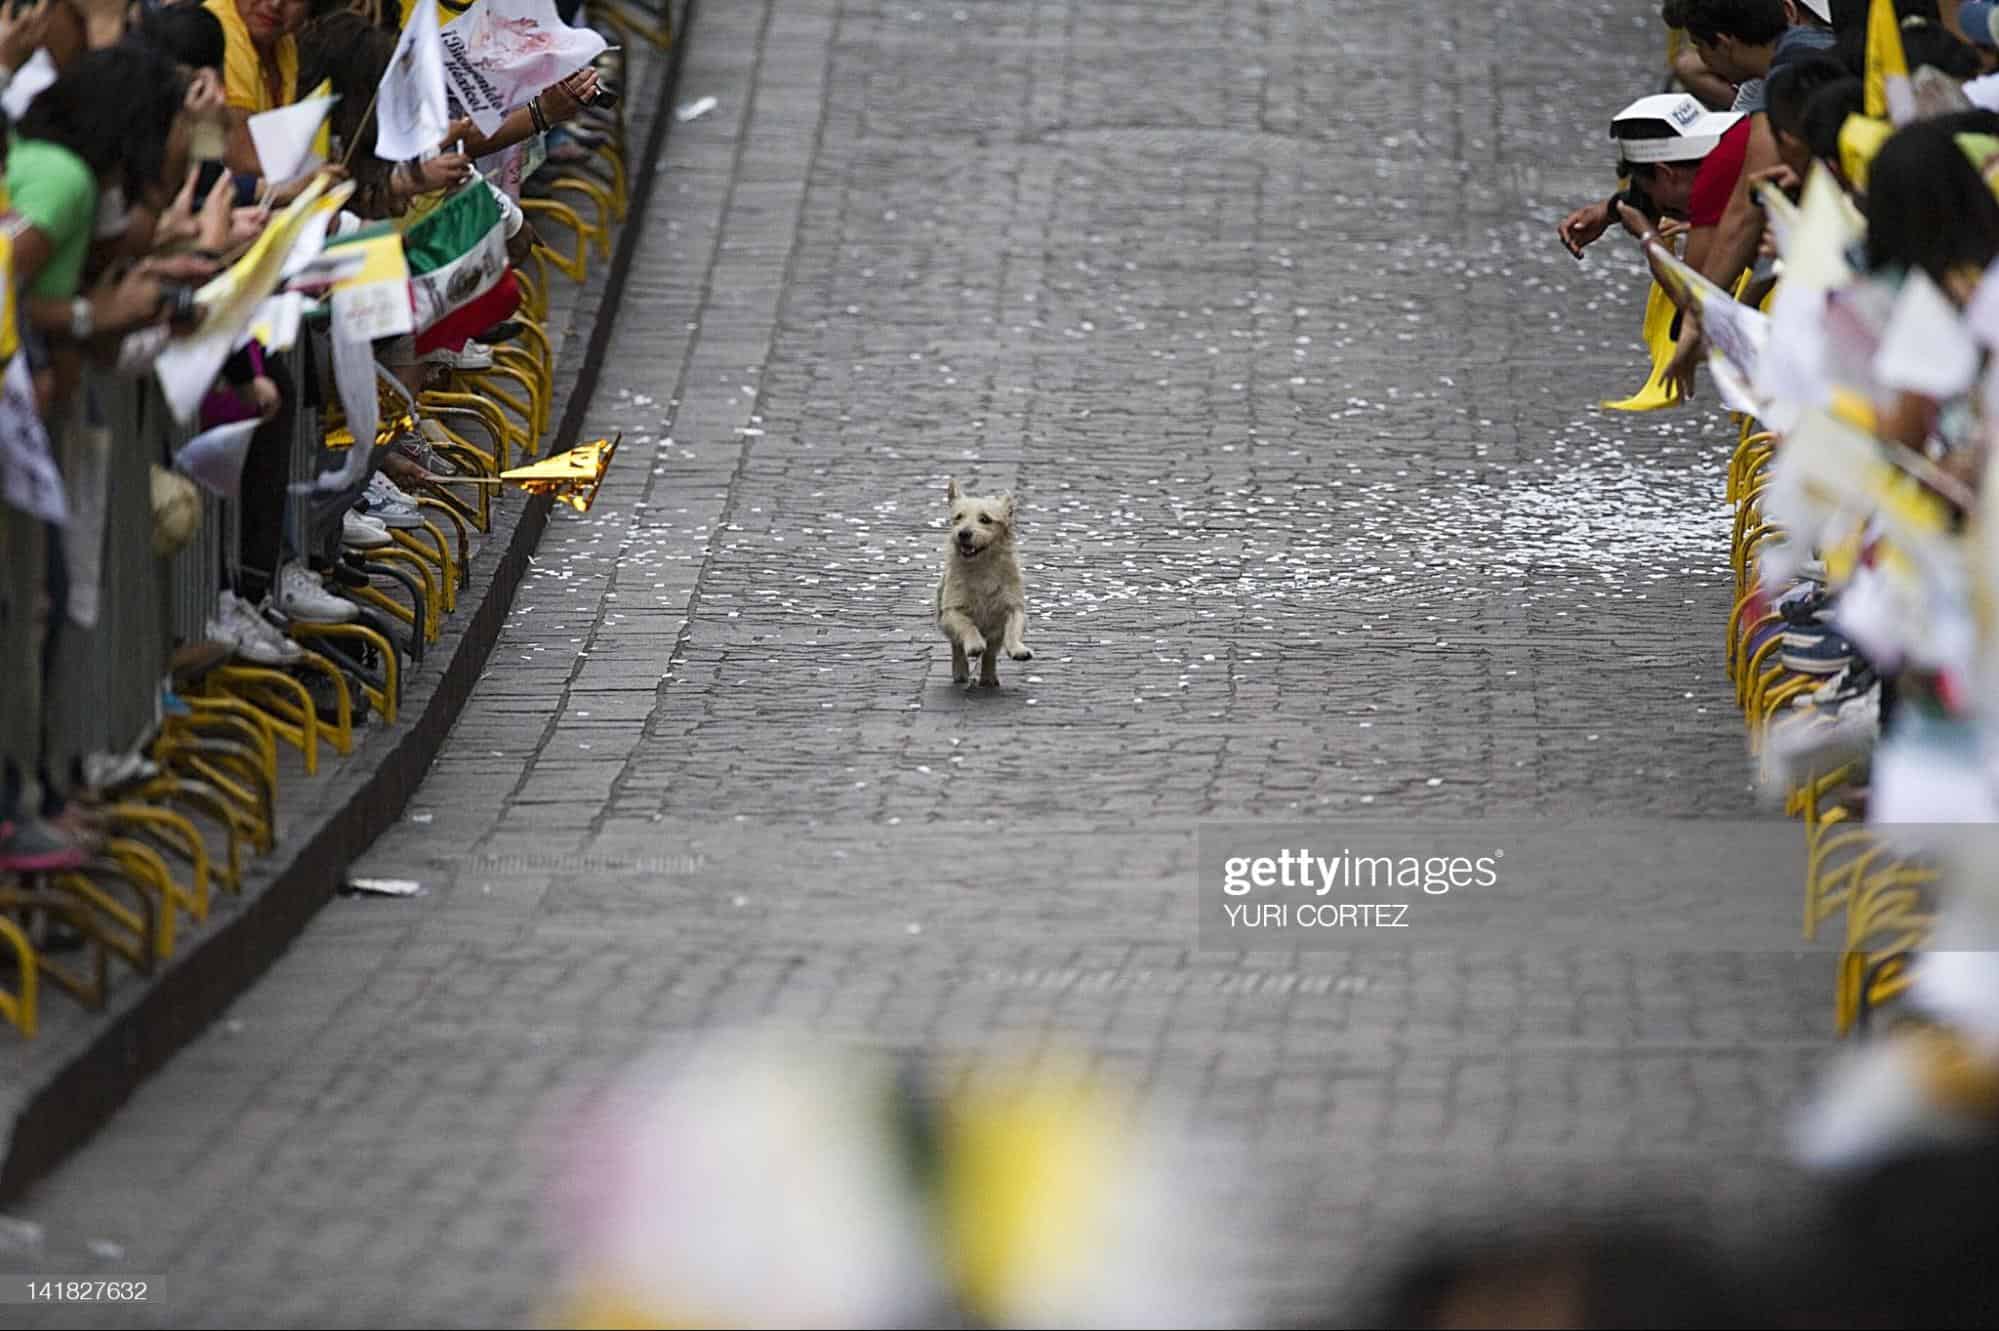 the dog runs down the street thinking it's his parade